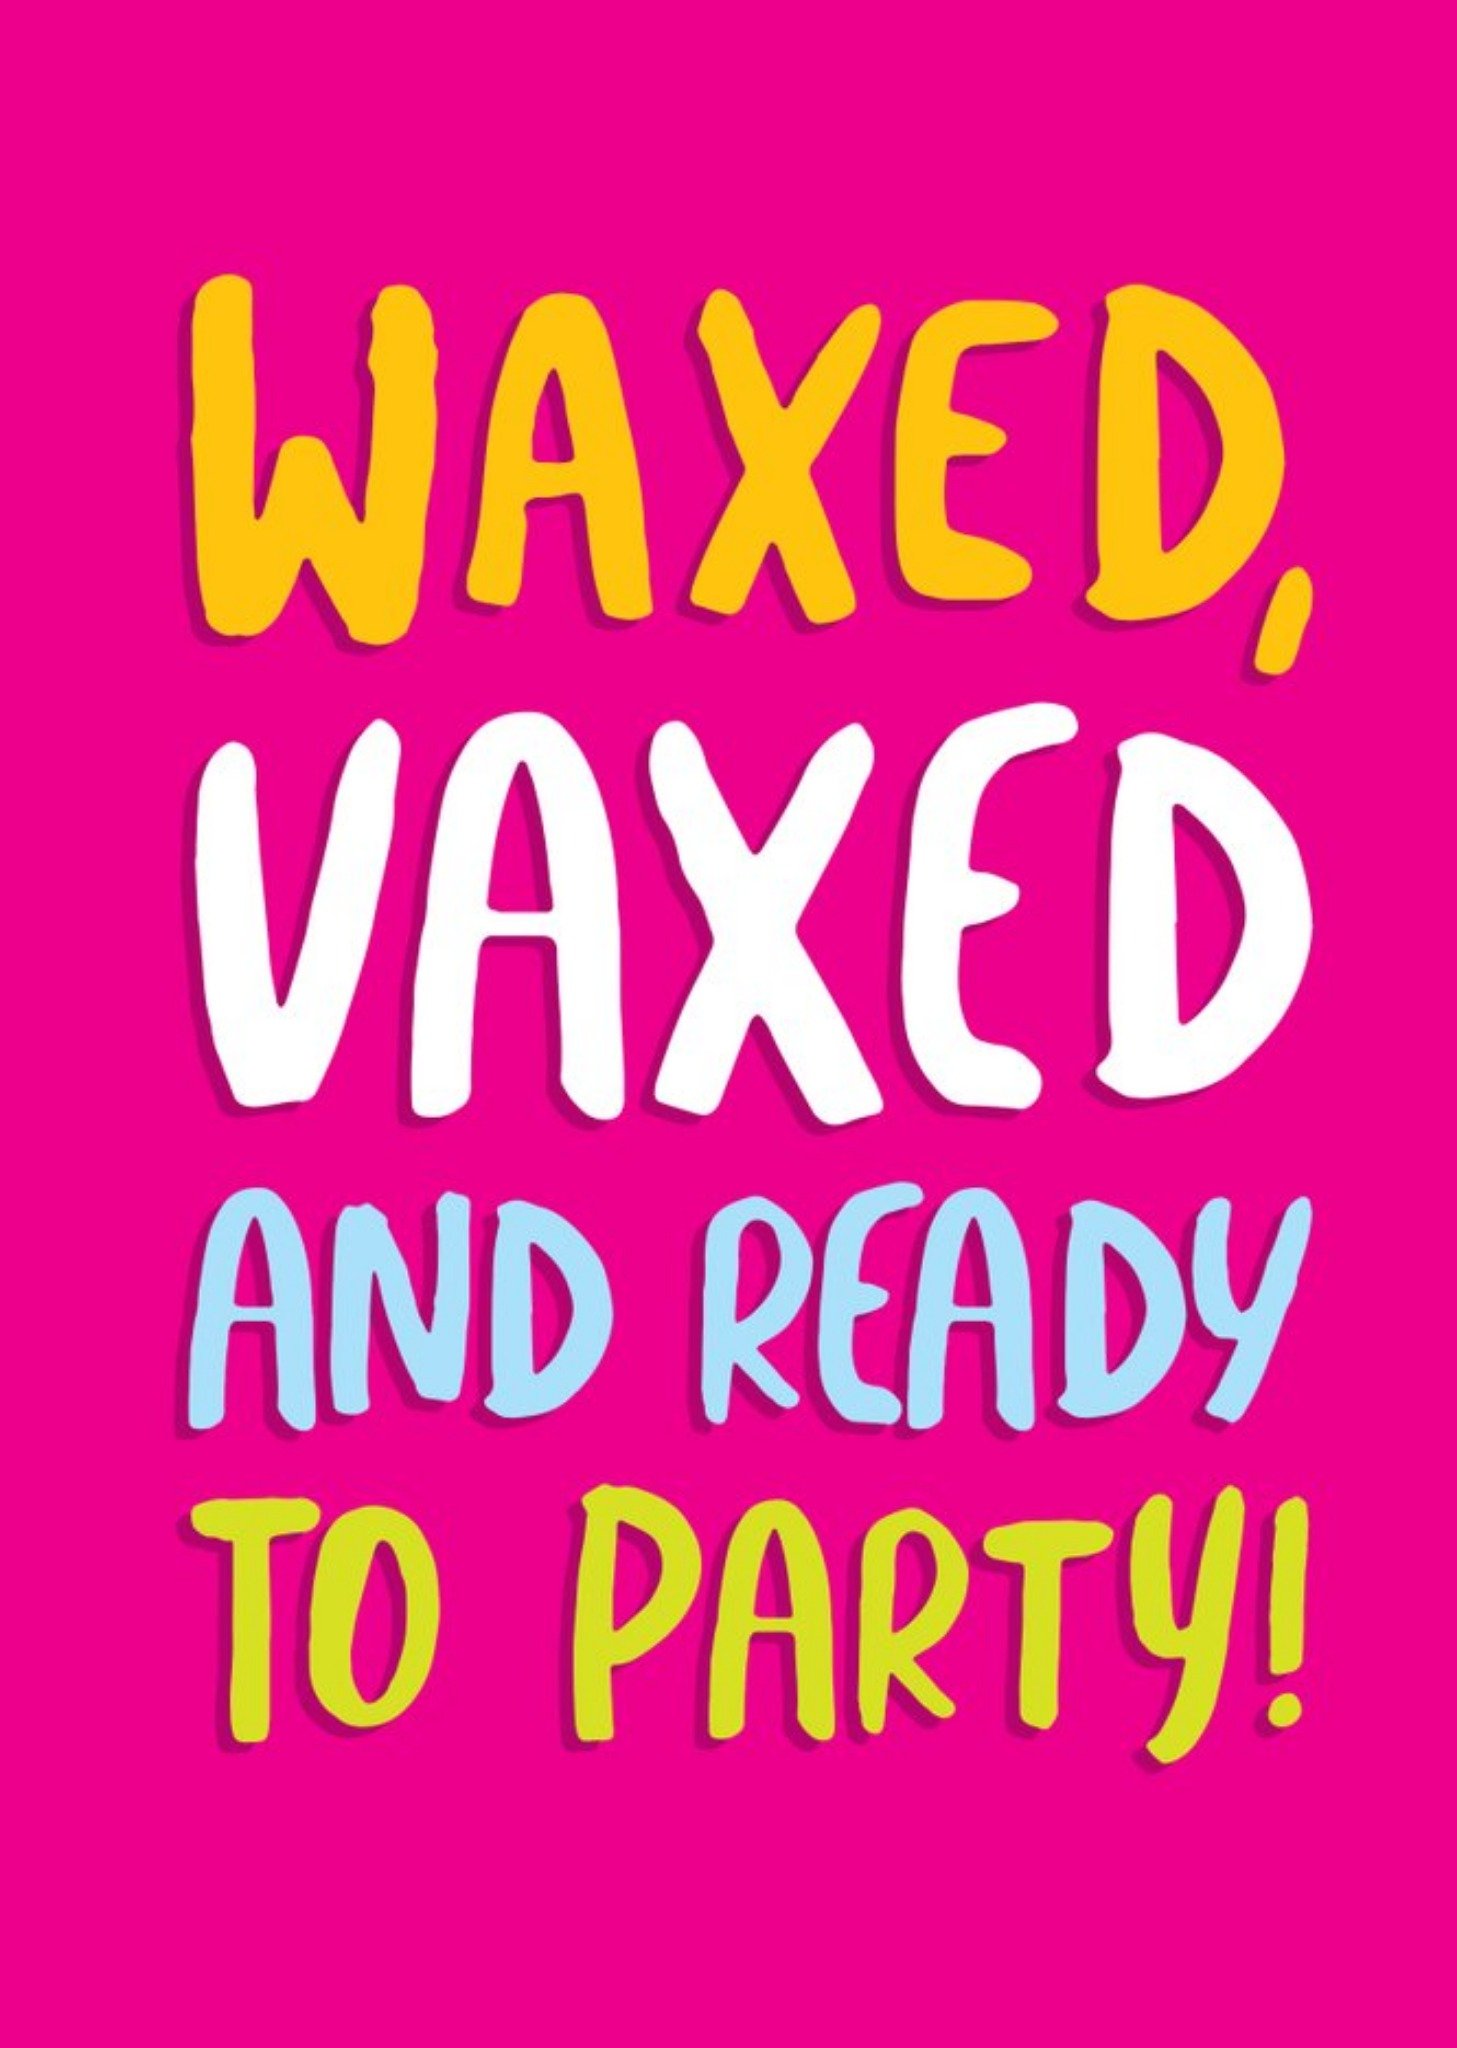 Moonpig Funny Covid Waxed Vaxed And Ready To Party Birthday Card, Large